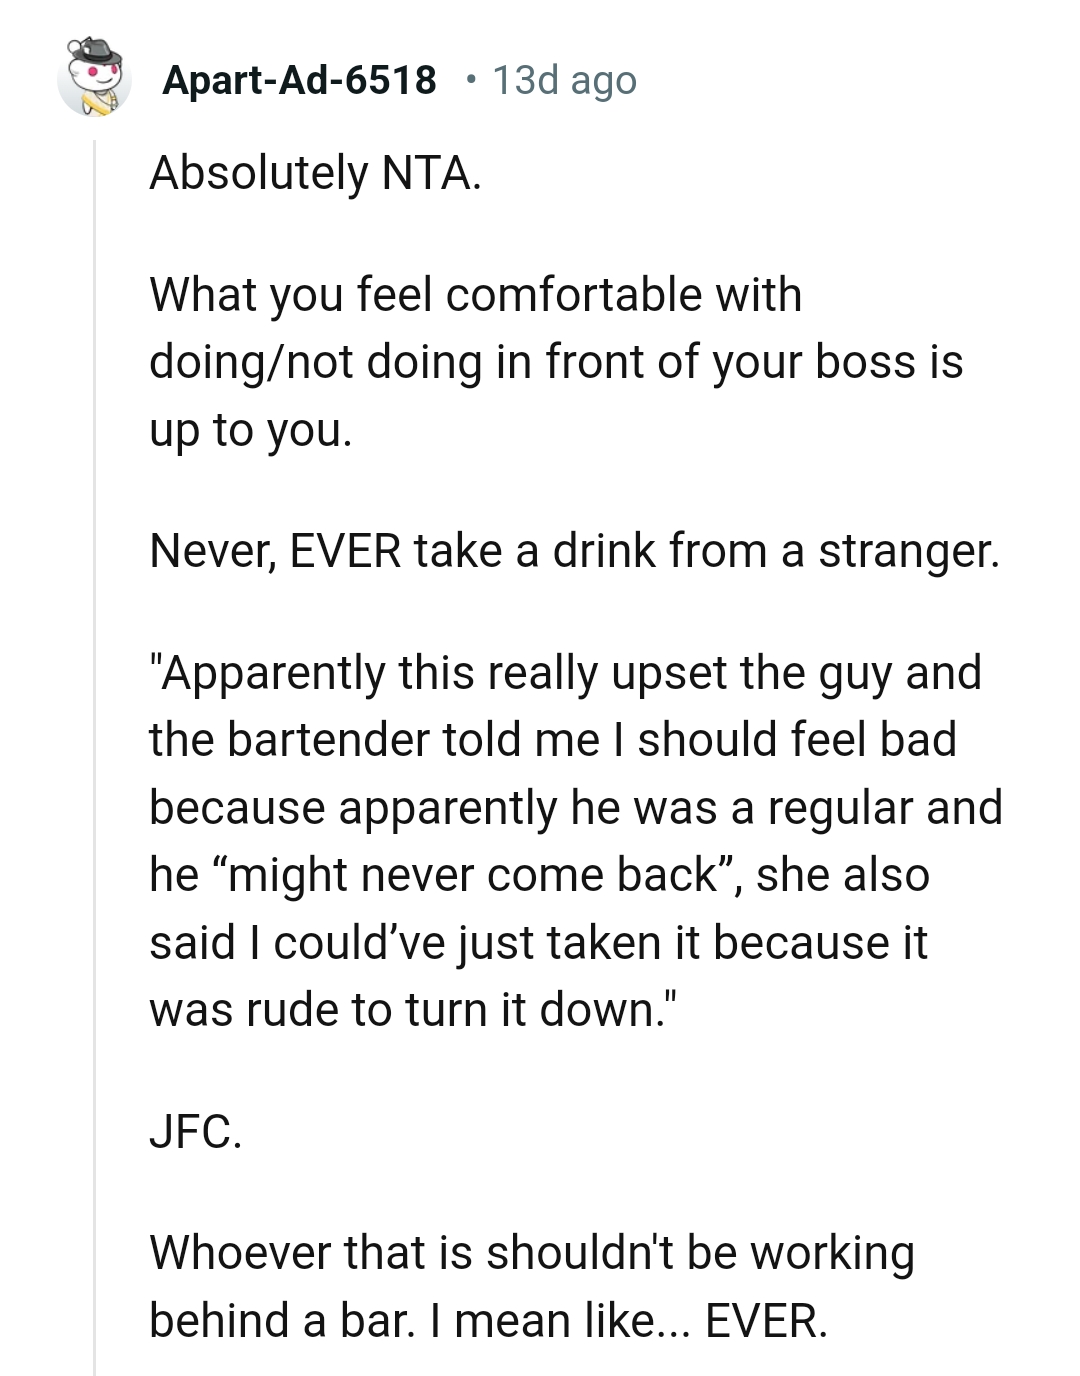 Never ever take take a drink from a stranger